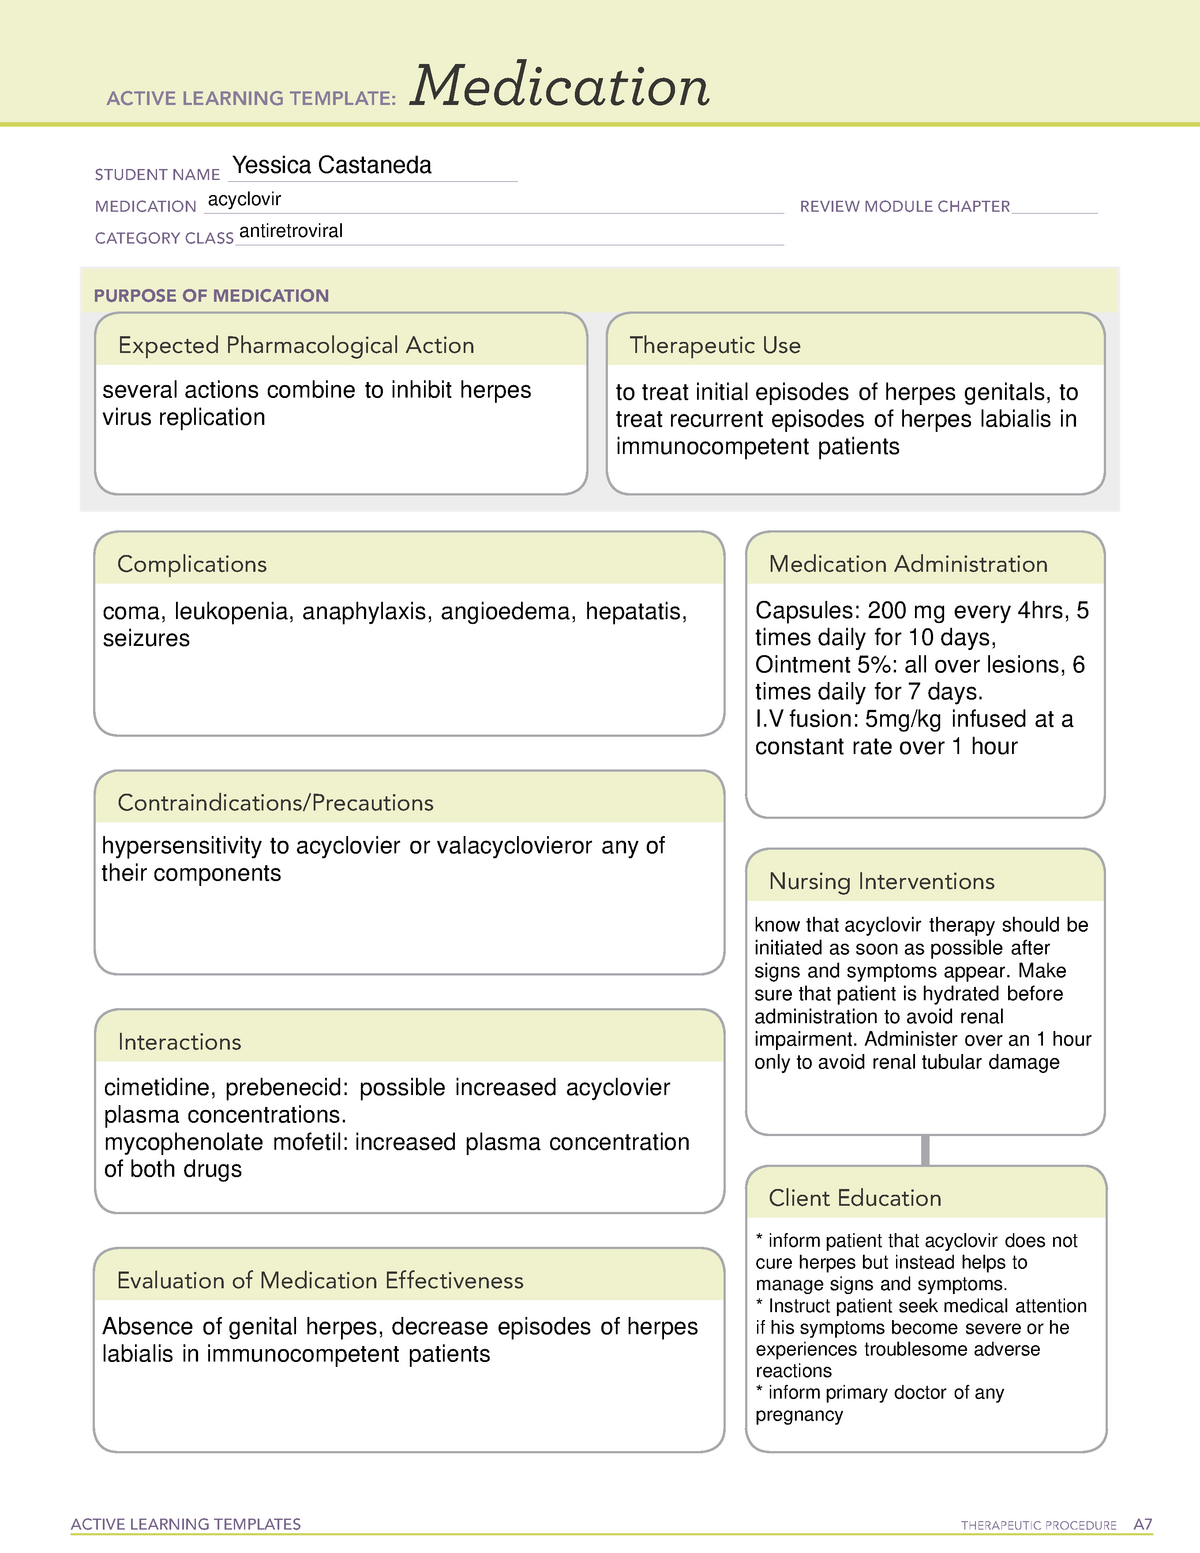 Acyclovir Med cards ACTIVE LEARNING TEMPLATES THERAPEUTIC PROCEDURE